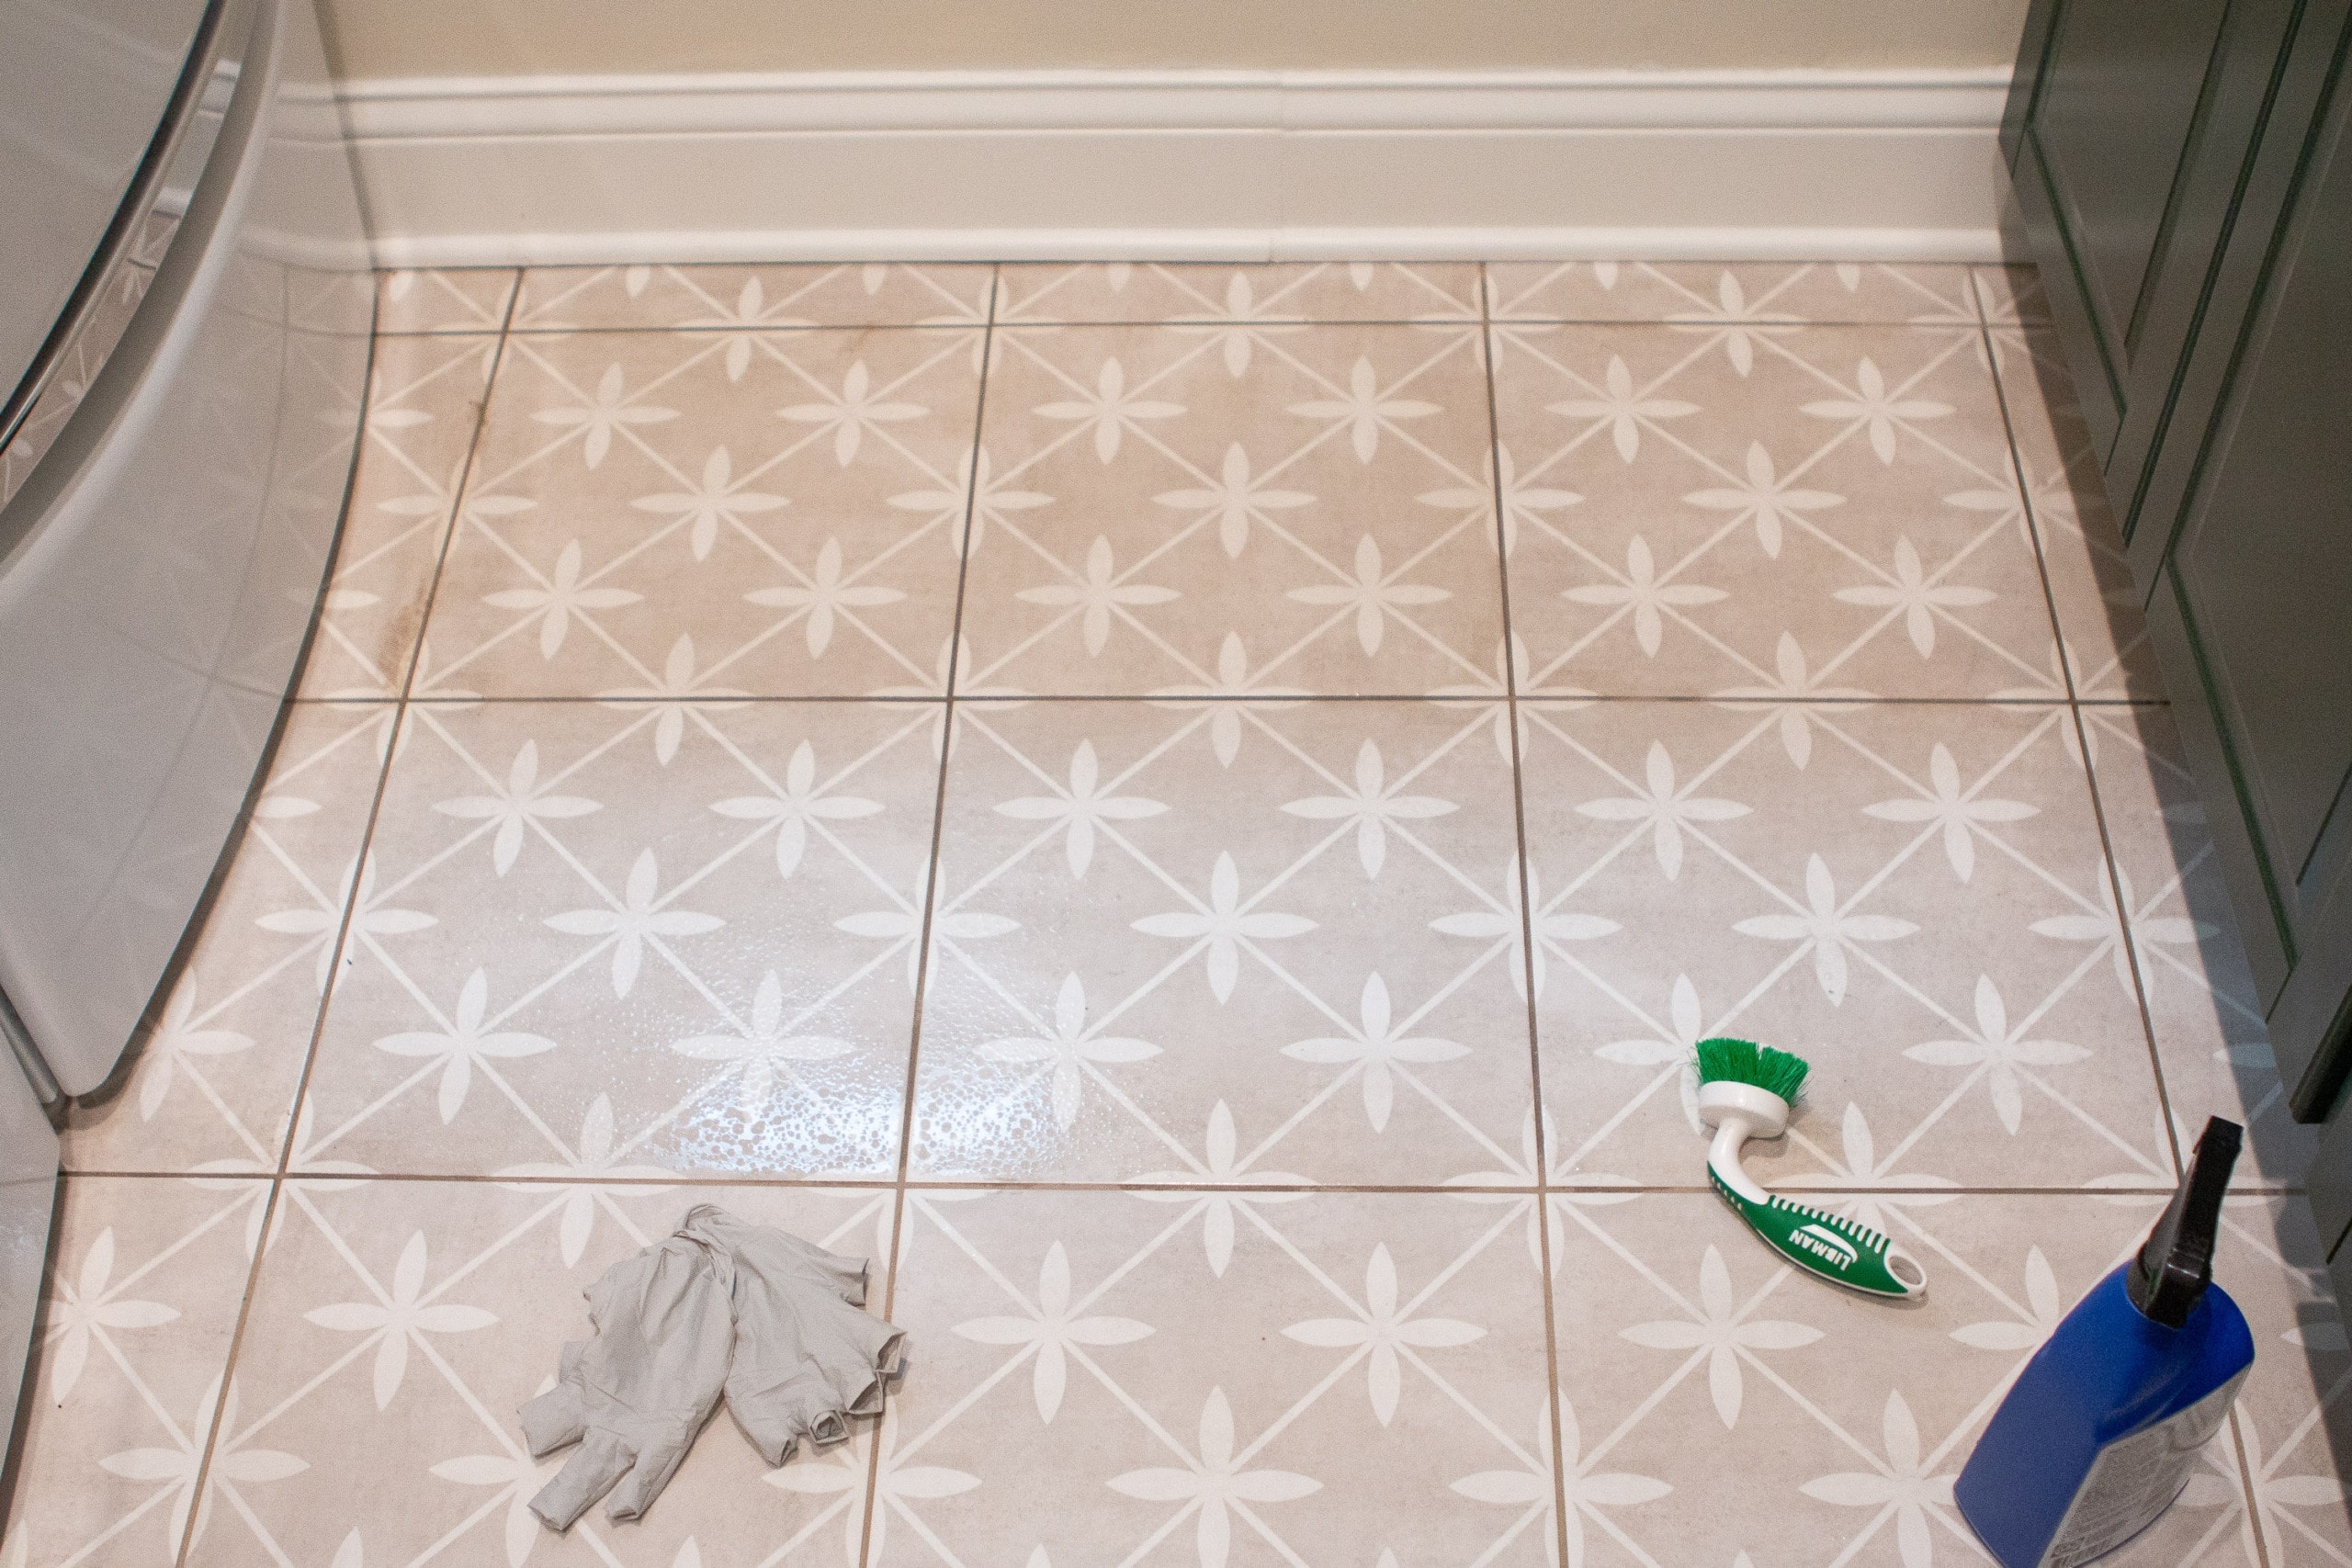 Clean And Seal Porcelain Tile Grout, How To Apply Sealer Porcelain Tile On Wall